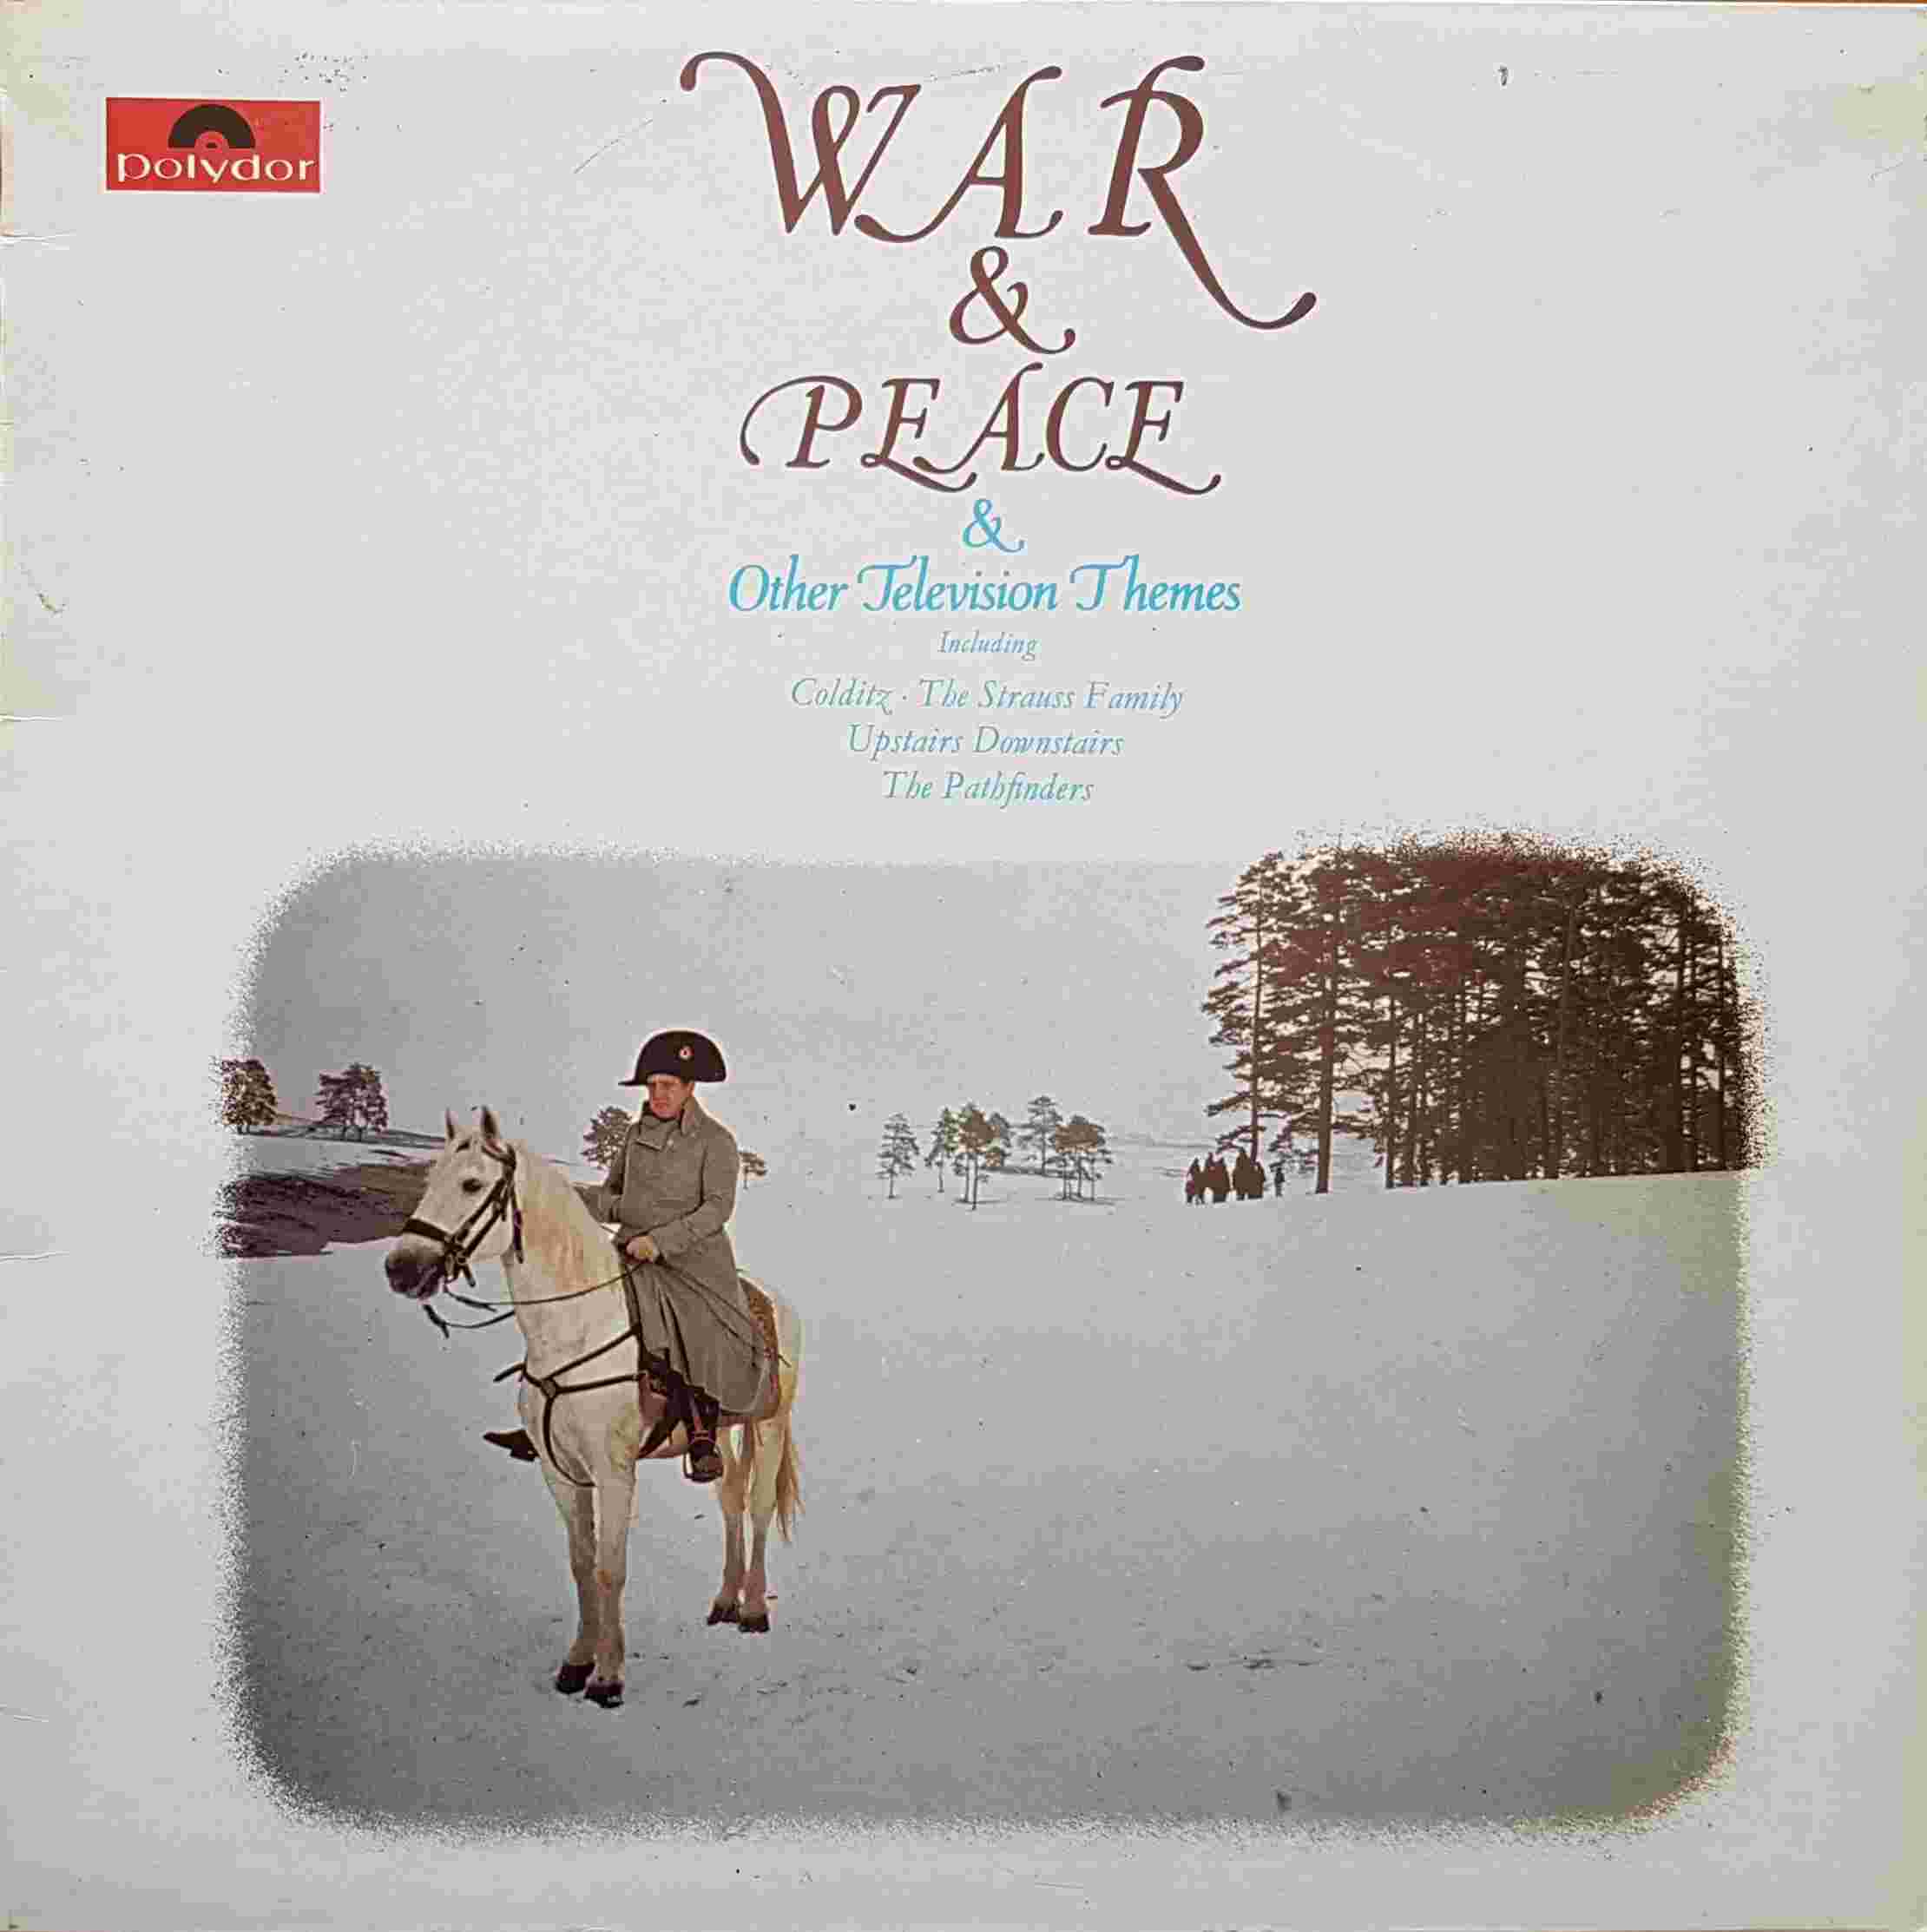 Picture of 2460 188 War and peace and other TV themes by artist Various from ITV, Channel 4 and Channel 5 albums library